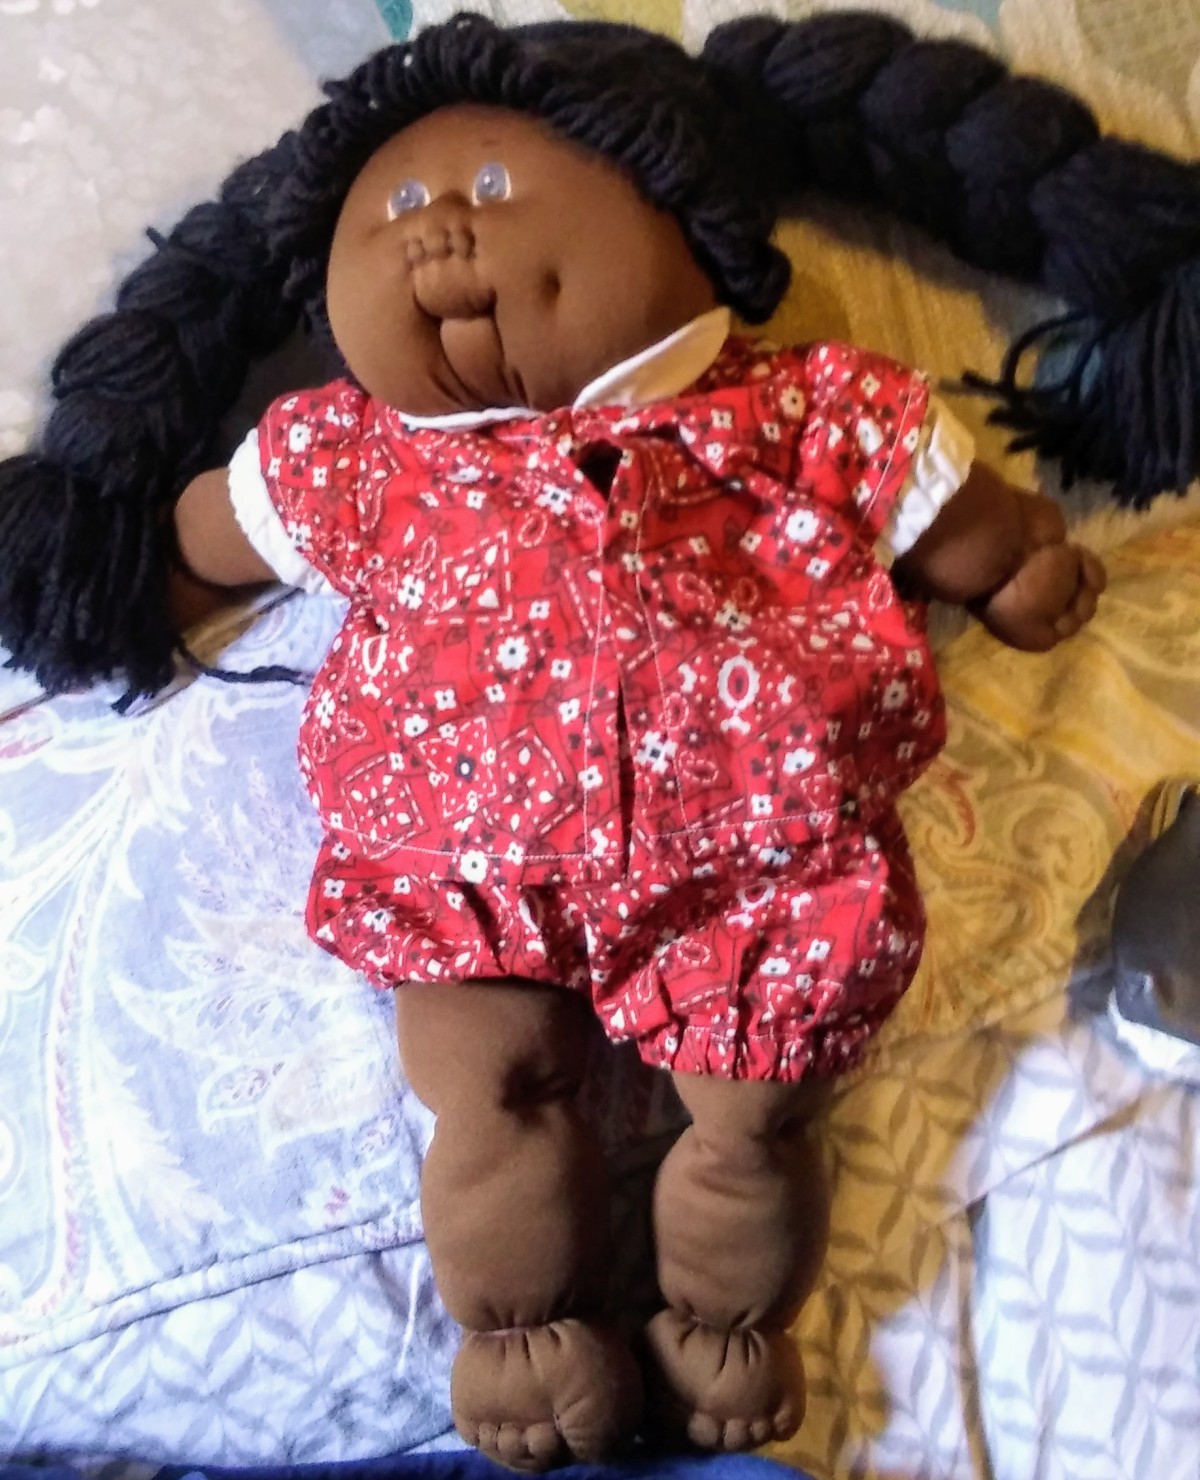 black cabbage patch